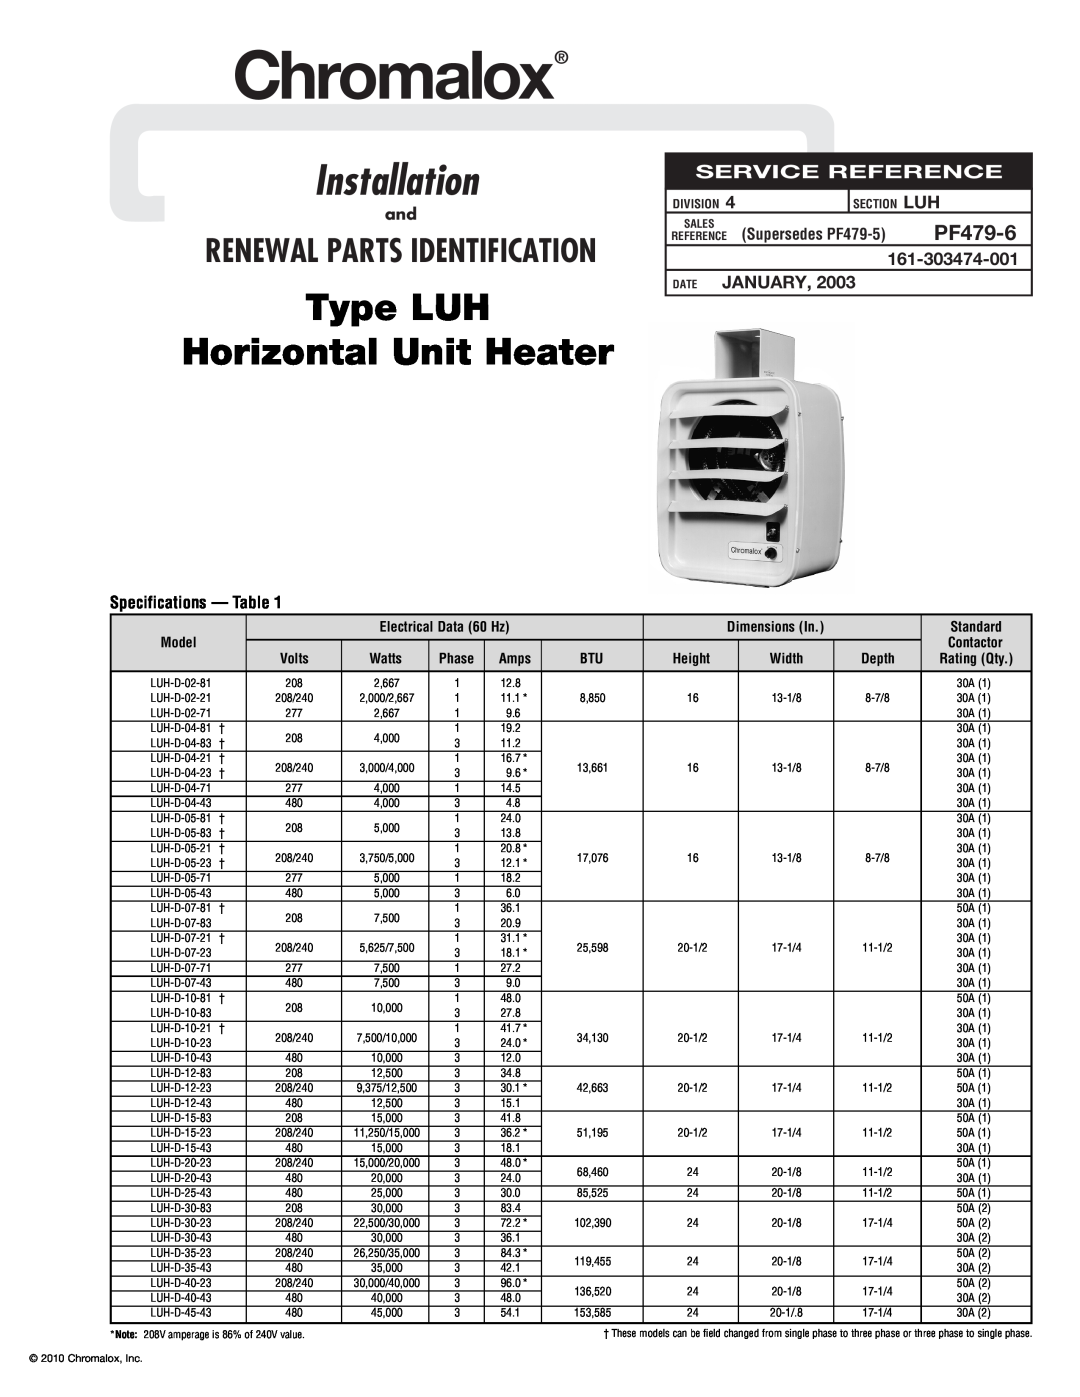 Chromalox PF479-6 dimensions Specifications - Table, Date January, Chromalox, Installation, Renewal Parts Identification 